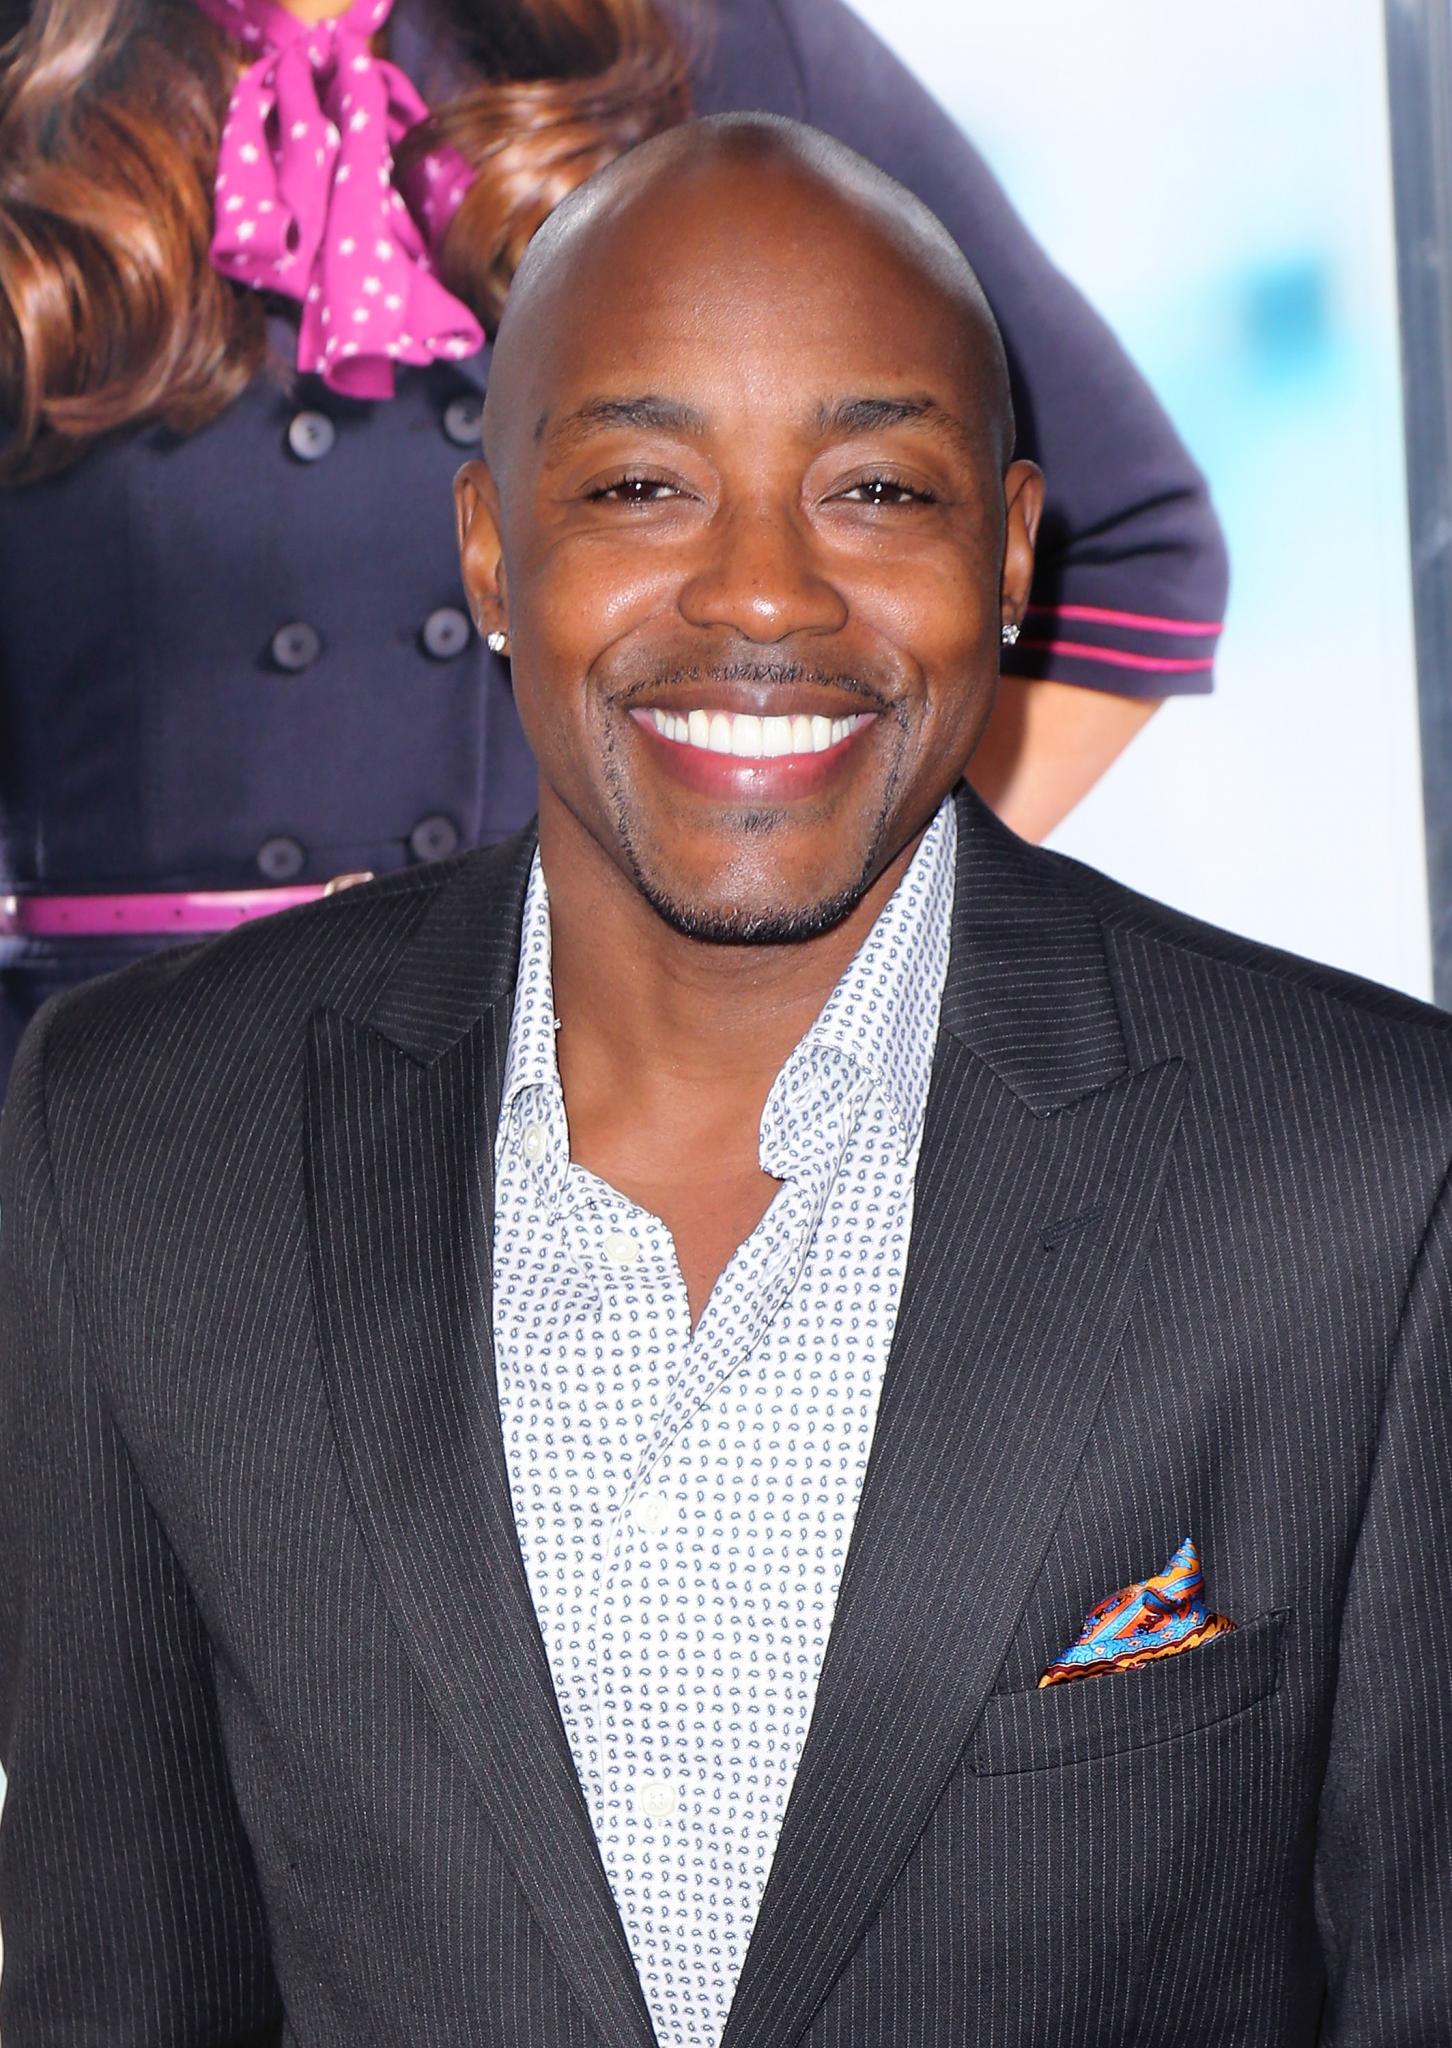 Will Packer Pens Passionate Open Letter to The Academy About Lack of Diversity: 'This is Embarrassing'